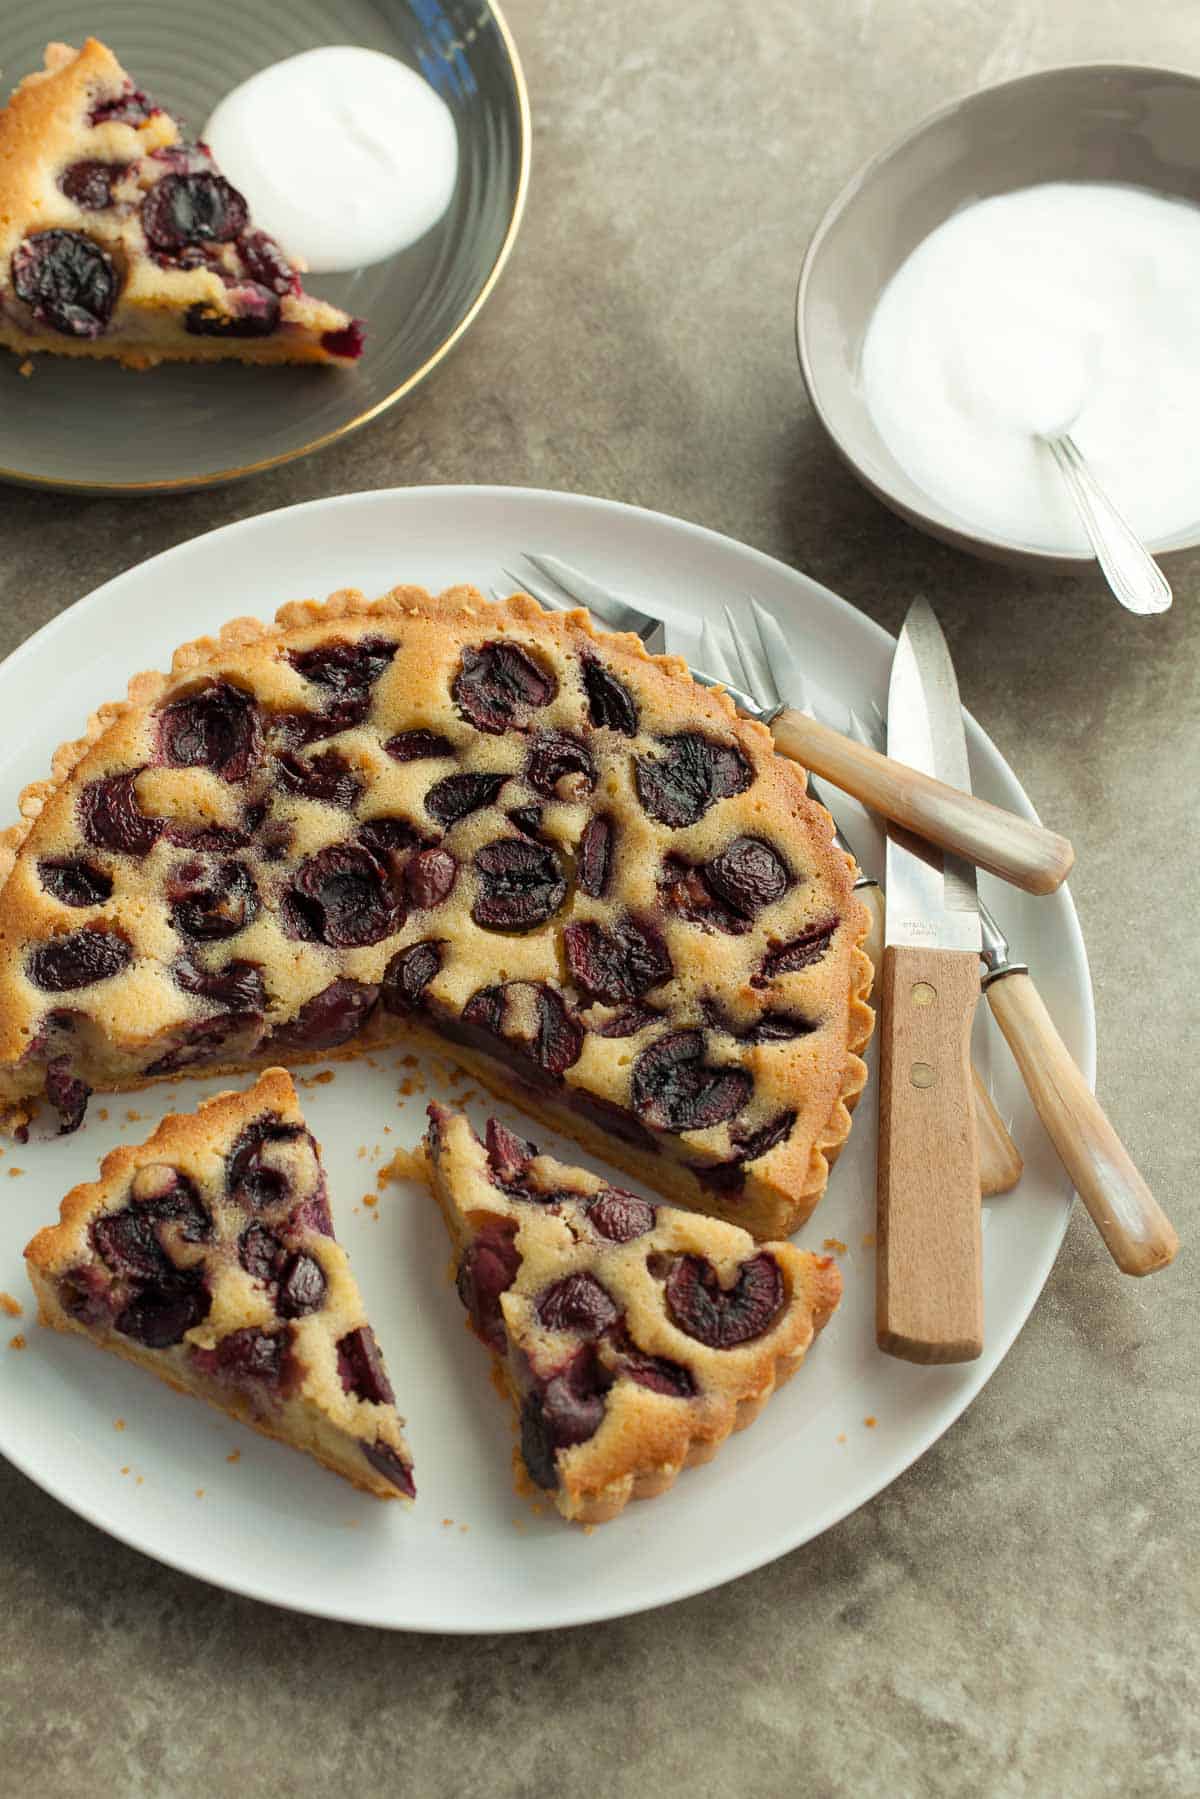 Frangipane Cherry Tart on Plate with forks and knife